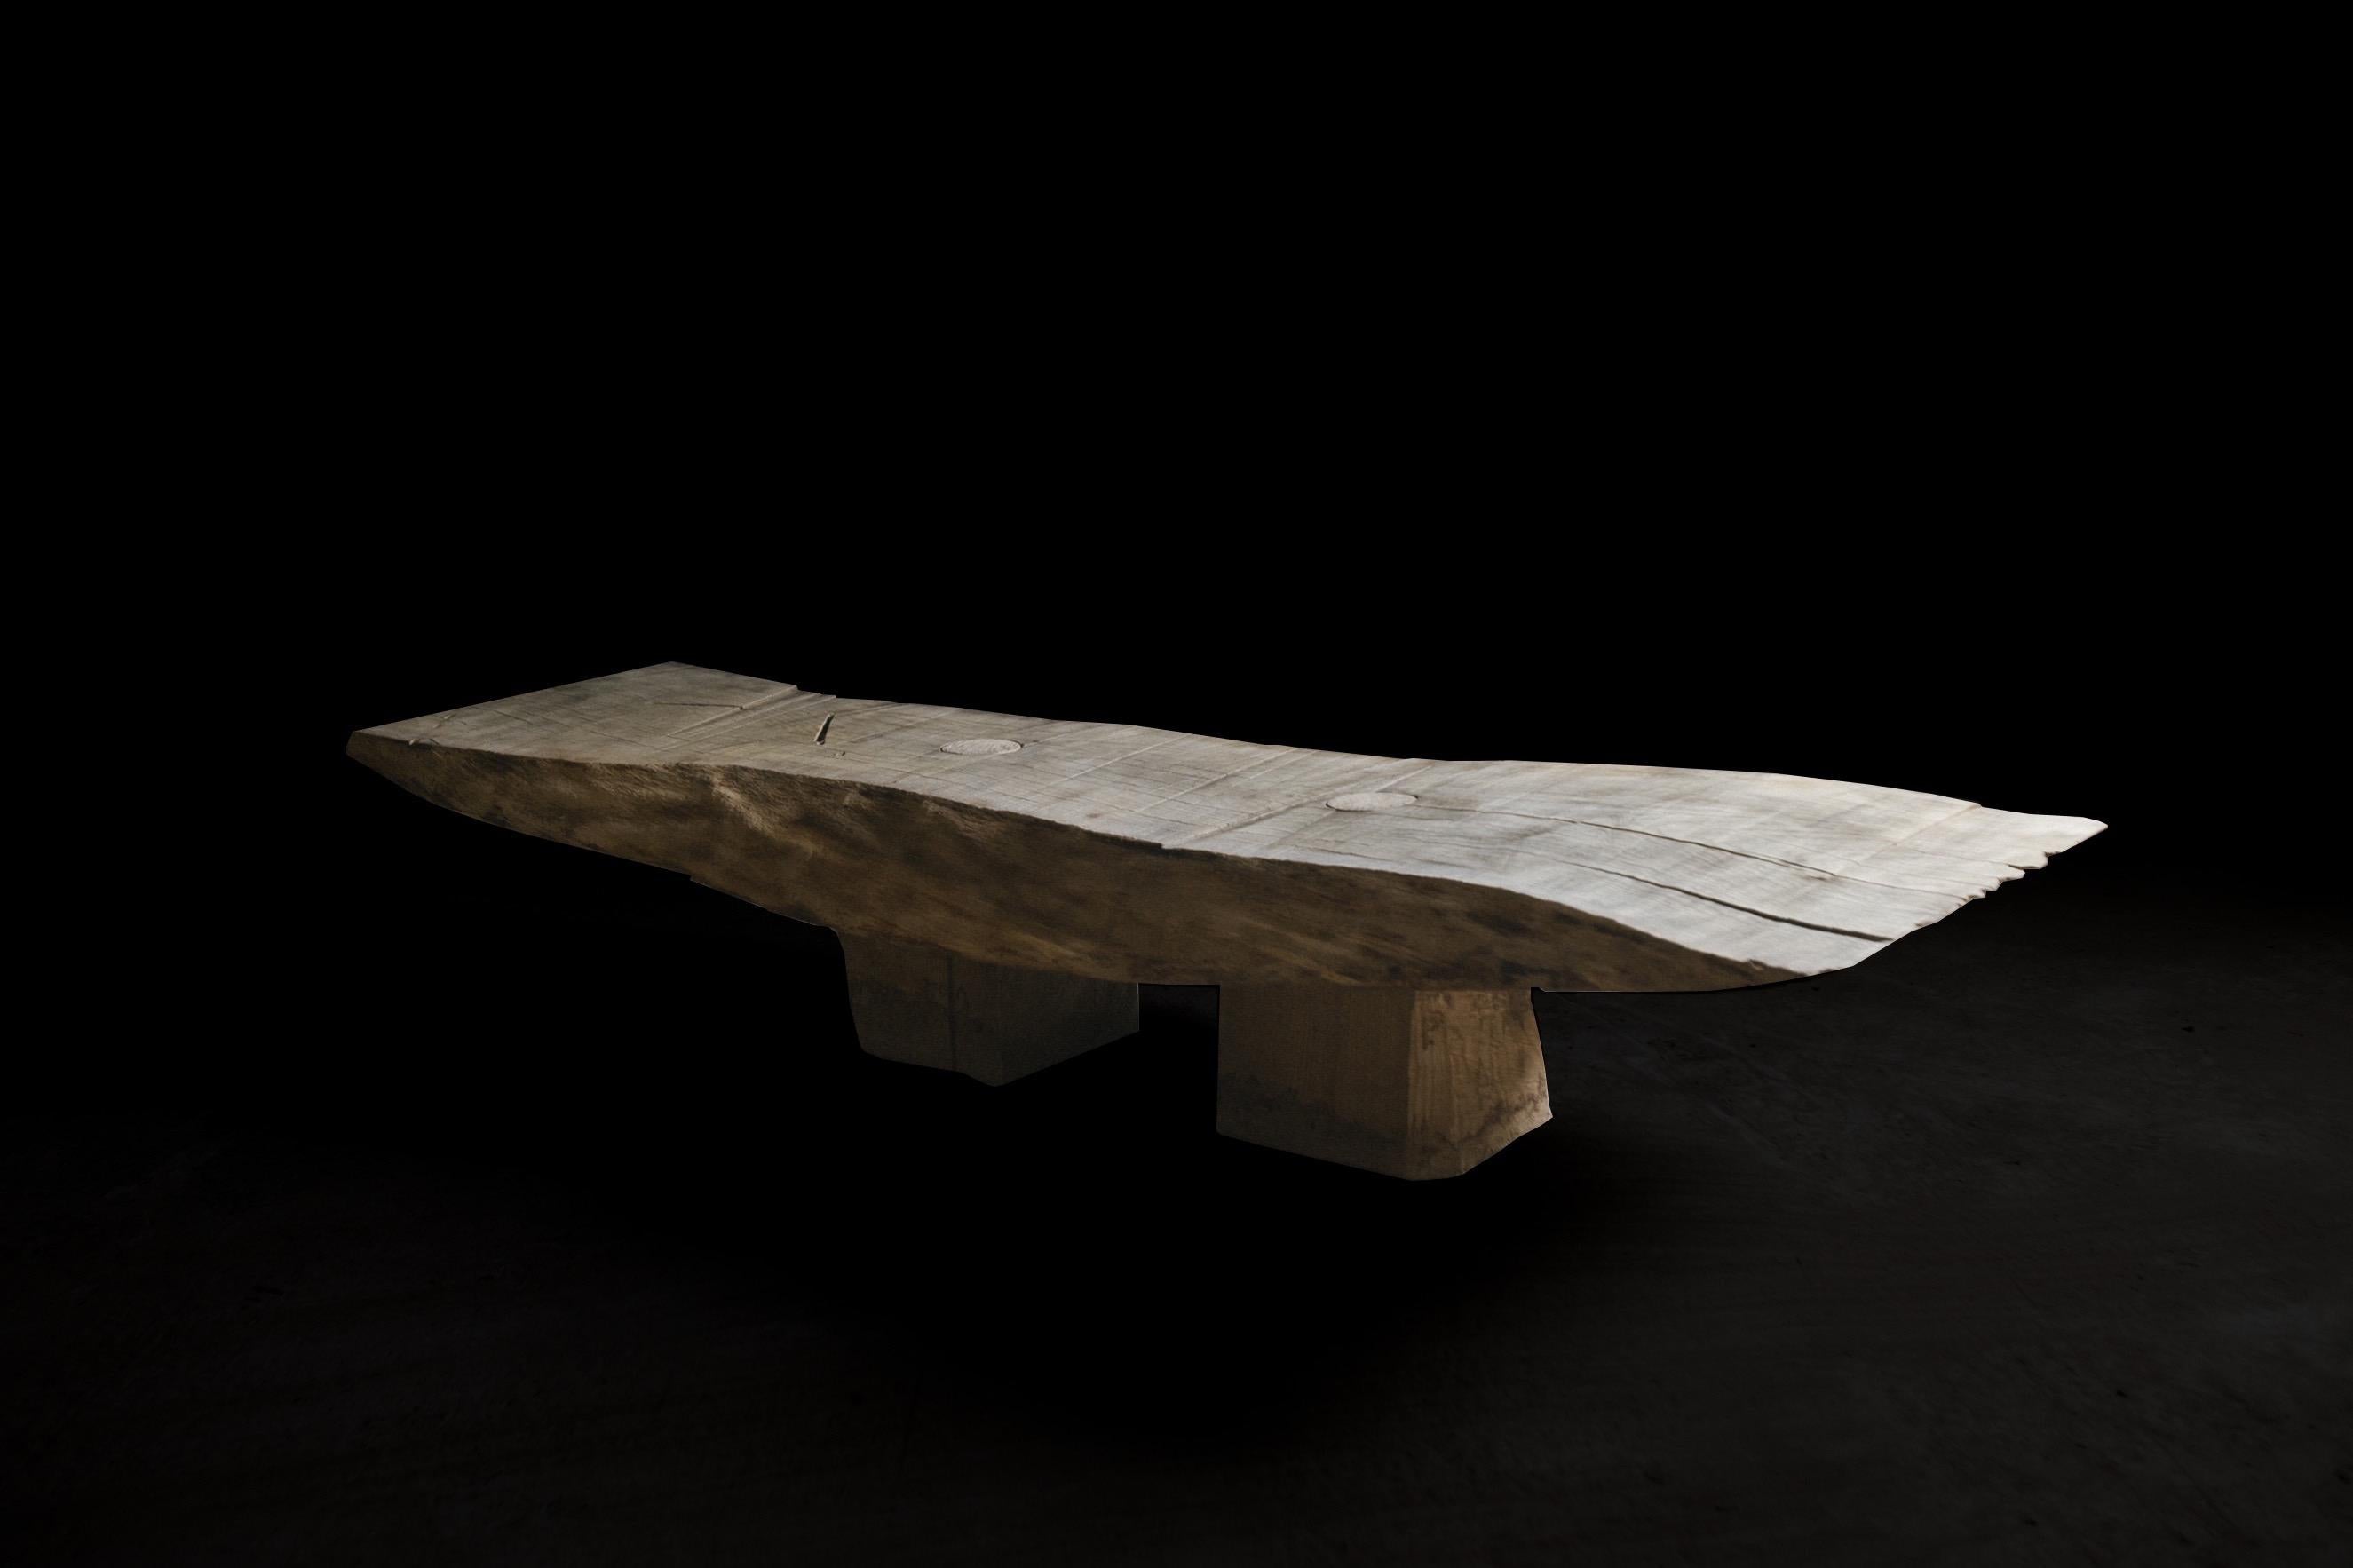 Bench or low table made of solid oak (+ linseed oil)
(Outdoor use OK)
Measures: 35 x 180 x 60 cm

Warm furniture’s made by Russian designer Denis Milovanov from 